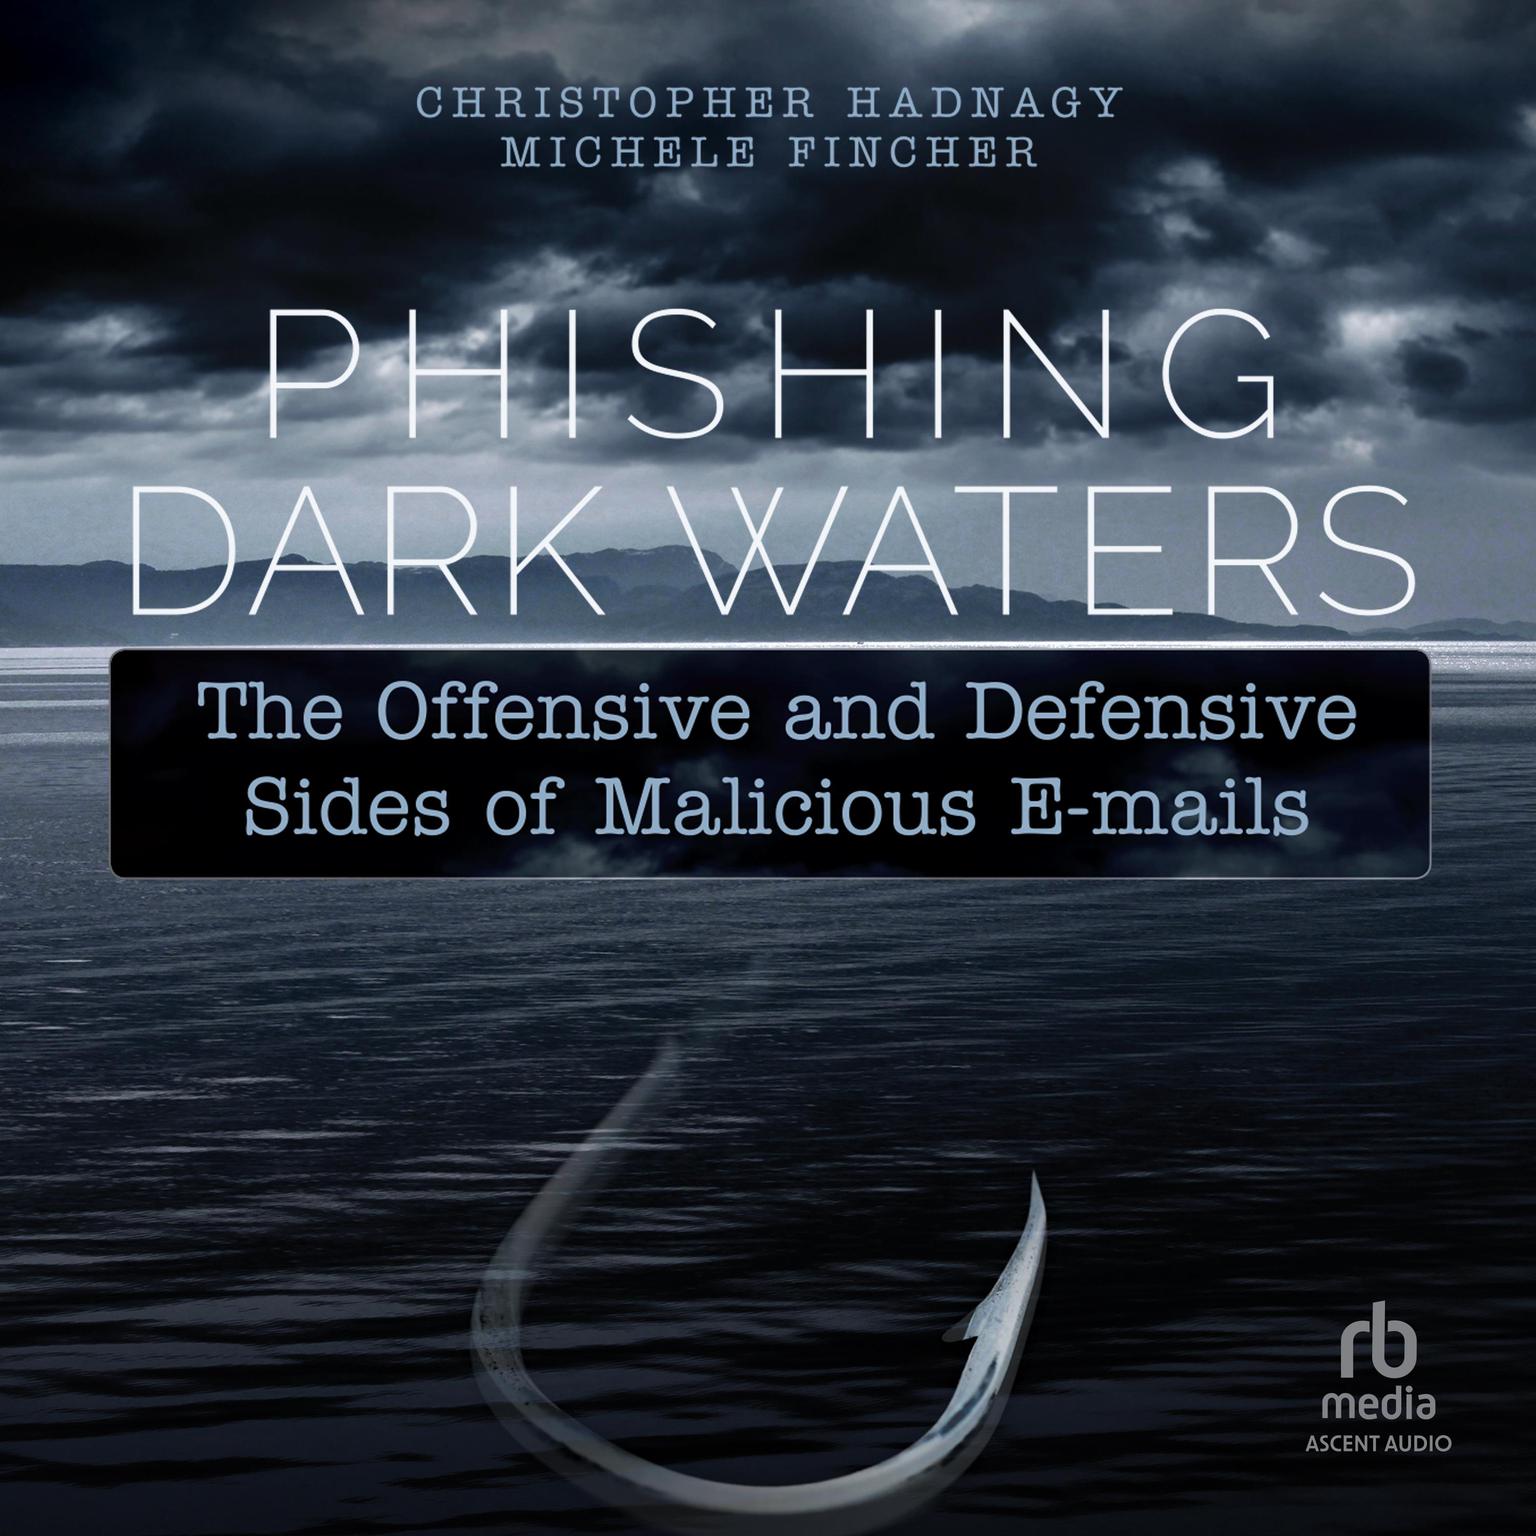 Phishing Dark Waters: The Offensive and Defensive Sides of Malicious Emails Audiobook, by Michele Fincher